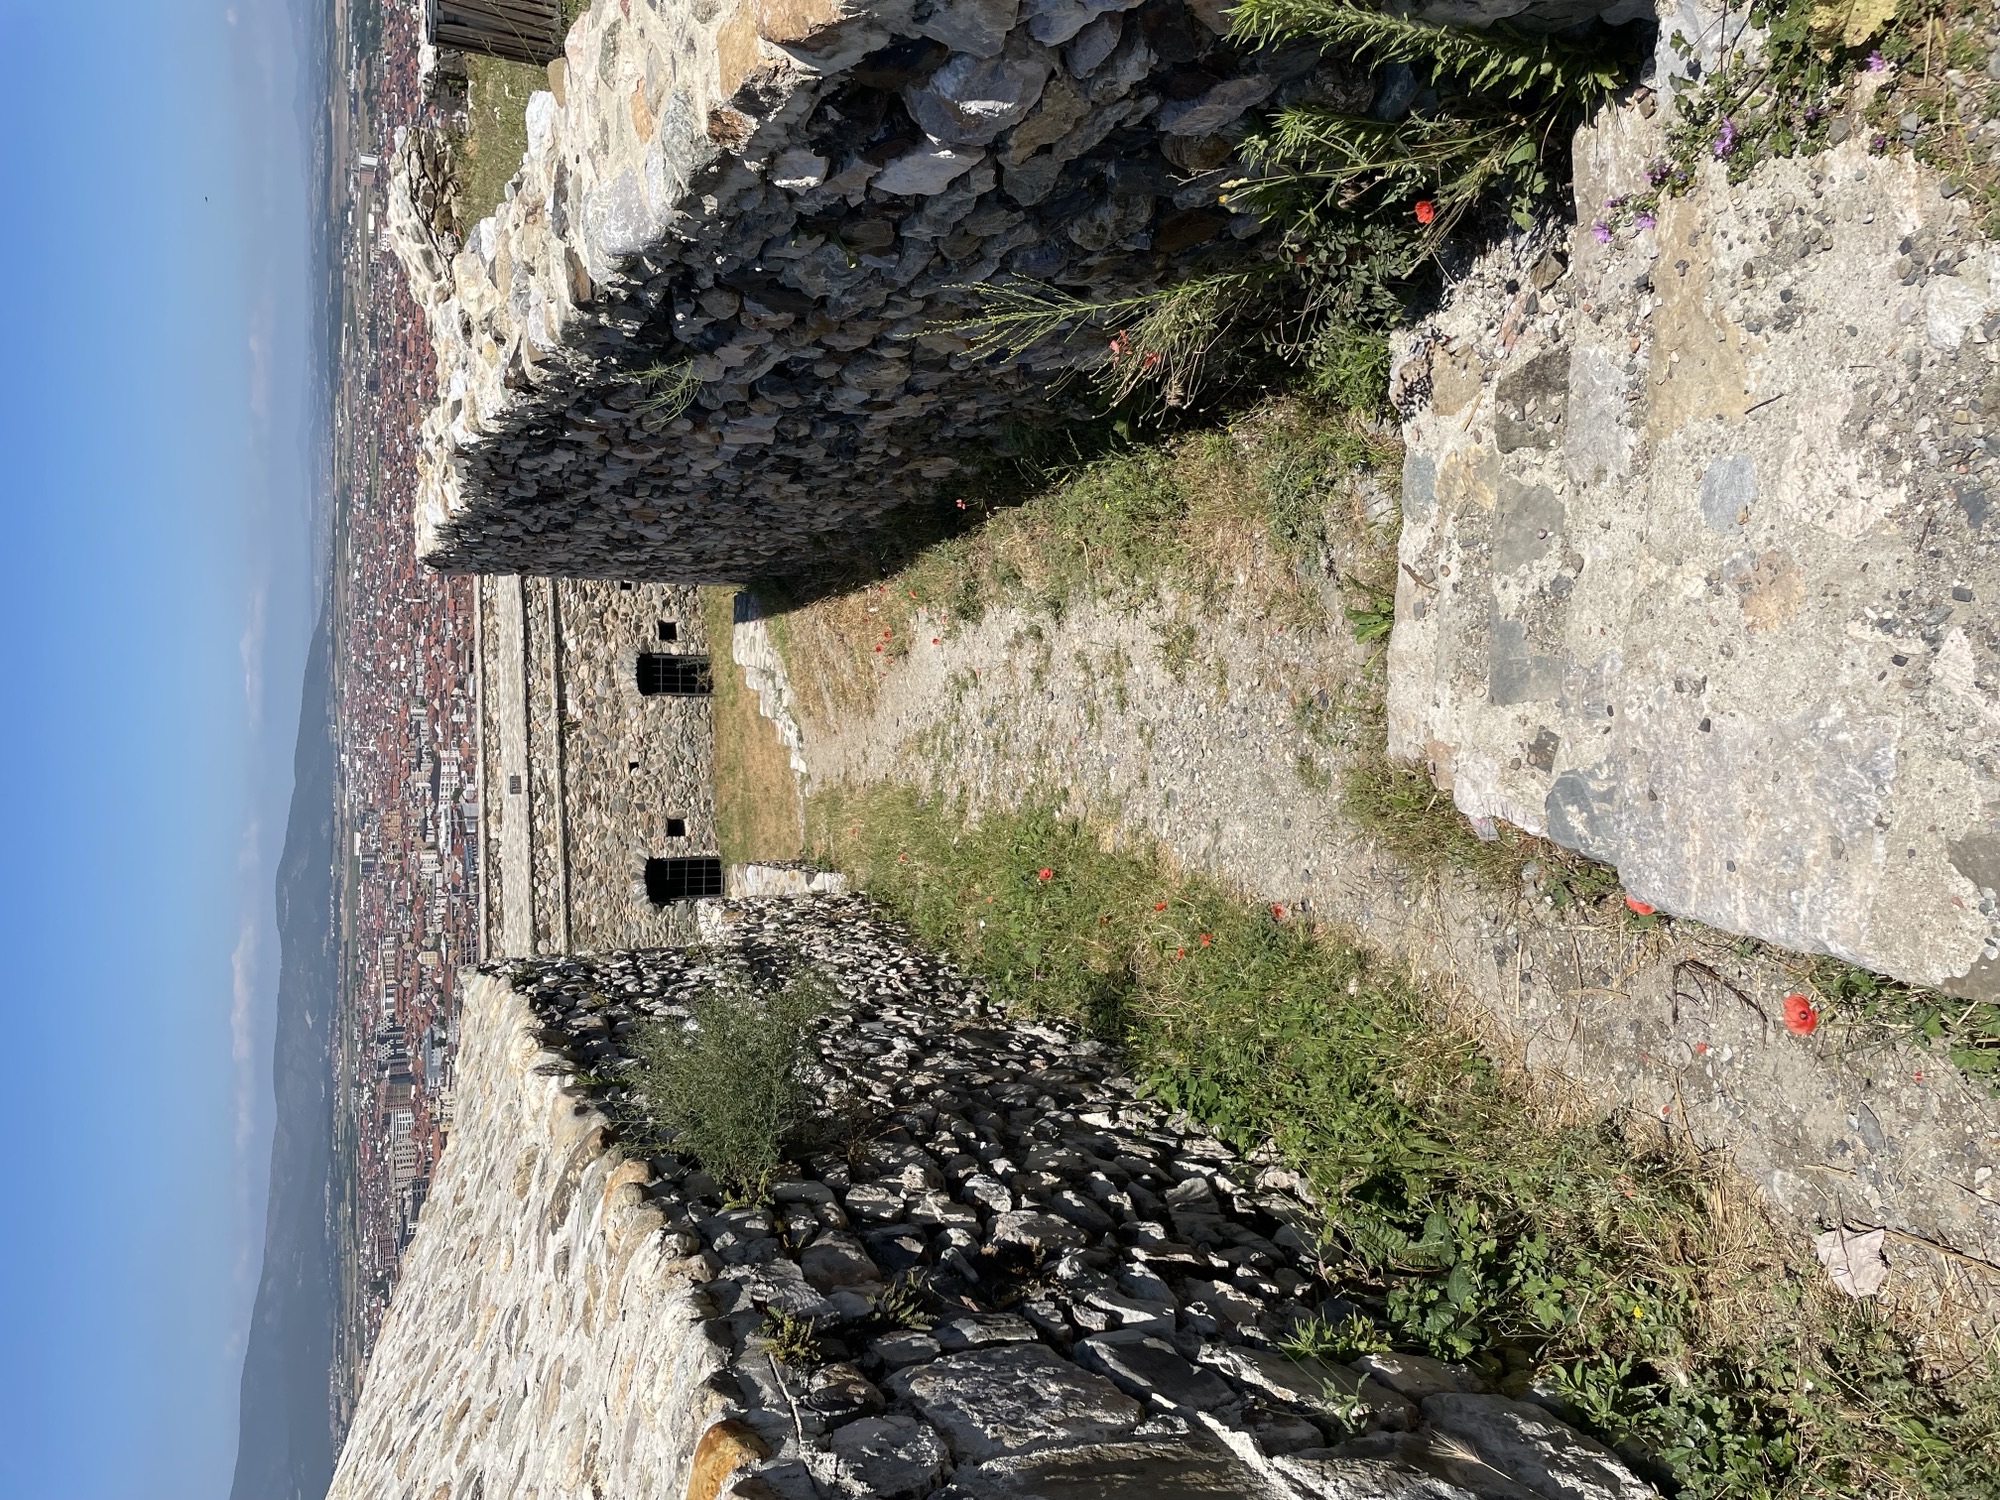 The stone walls of the fortress, with the city of Prizren visible beyond them.